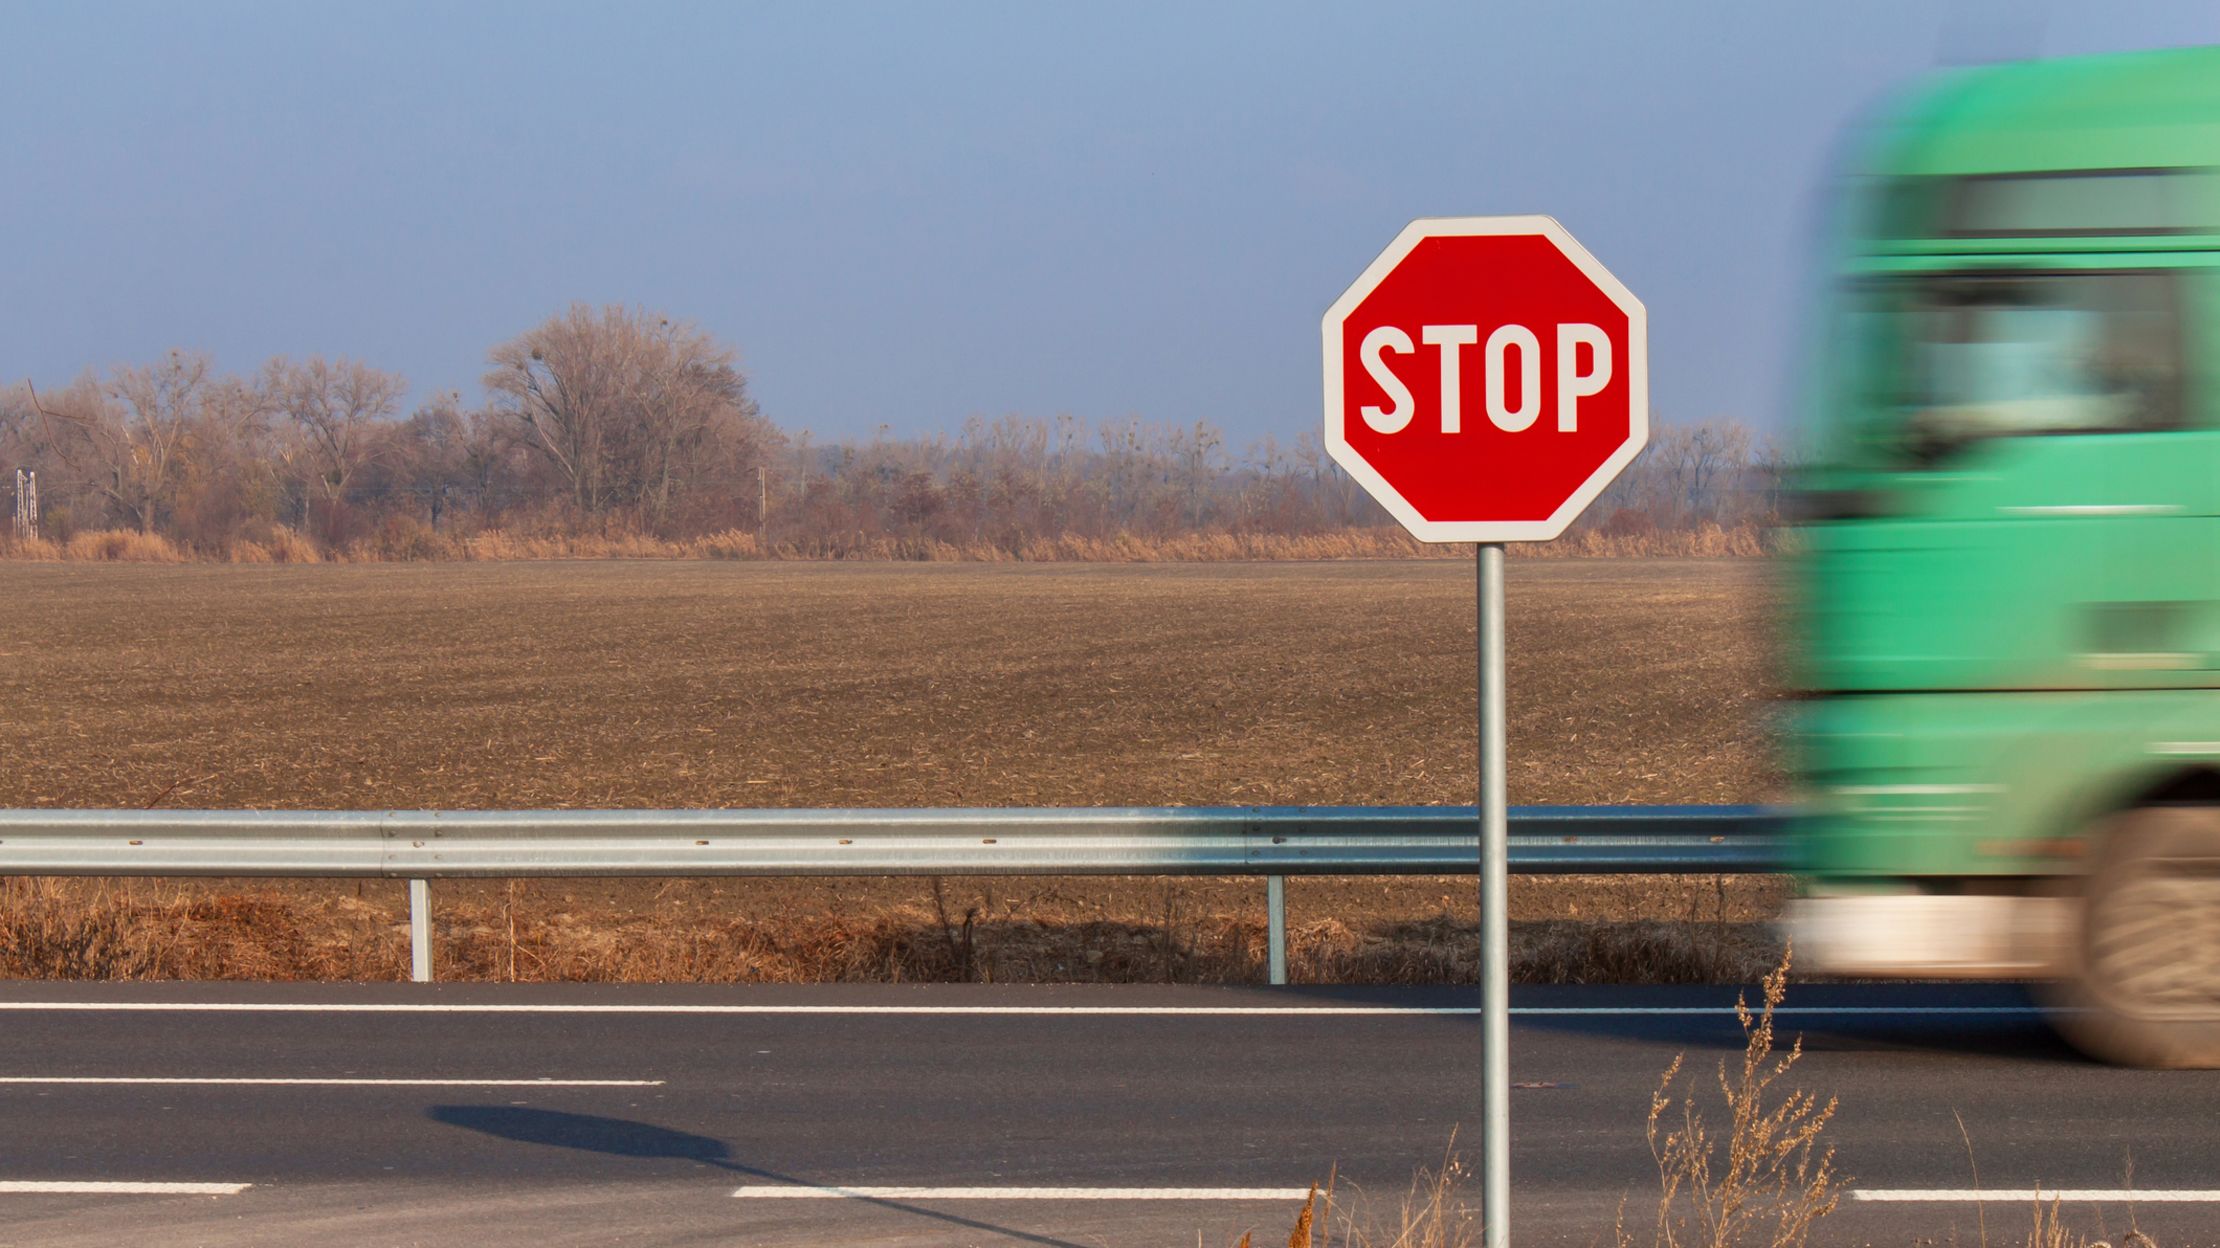 a stop sign stands near a road and field while a bus drives by